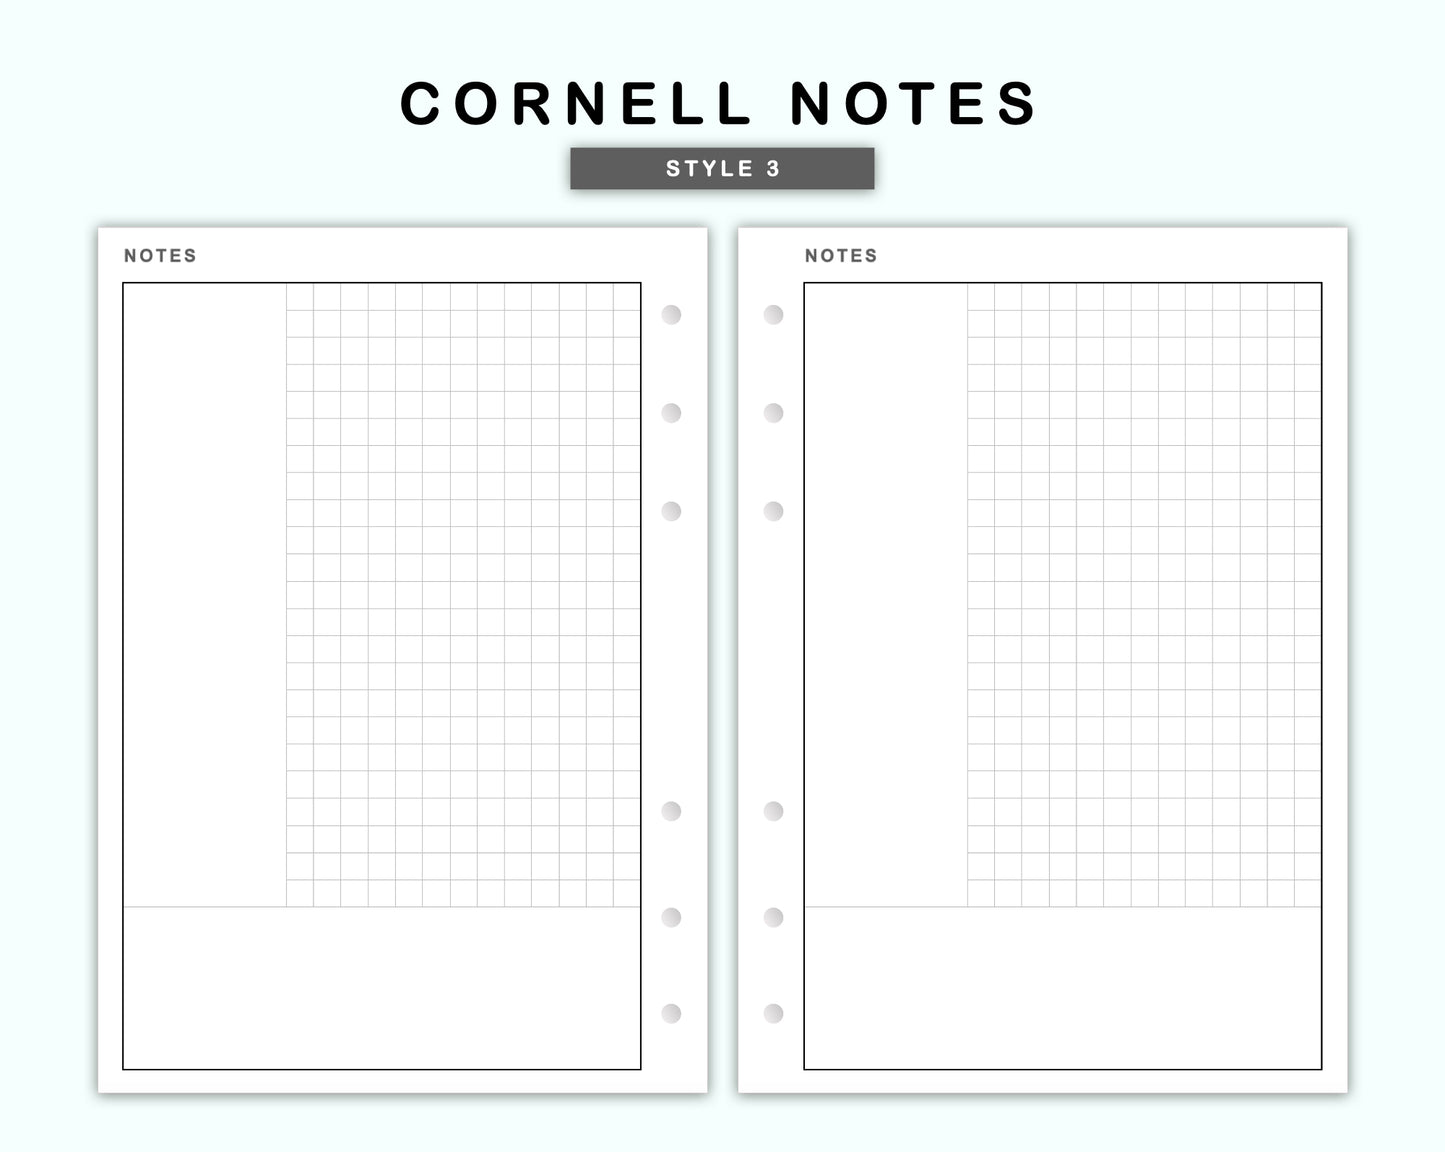 Personal Wide Inserts - Cornell Notes